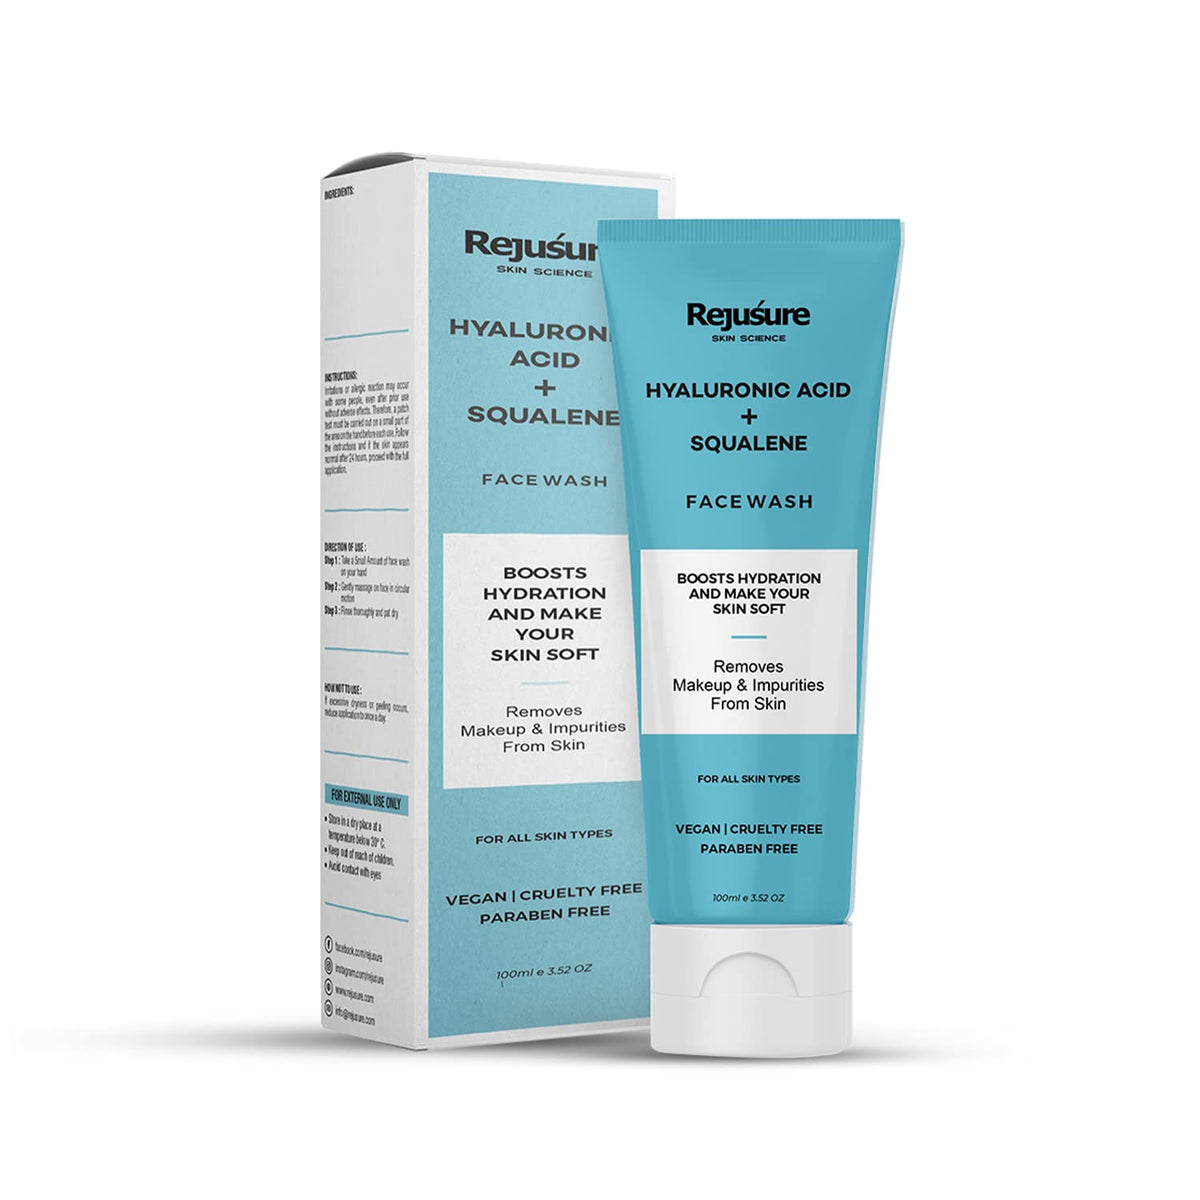 Rejusure Hyaluronic Acid + Squalene Face Wash with Hyaluronic Acid for Hydration with Anti-Aging Skin Care Properties, Soft, Refreshed & Smooth| Dry to Normal Skin | For Men & Women – 100 ml